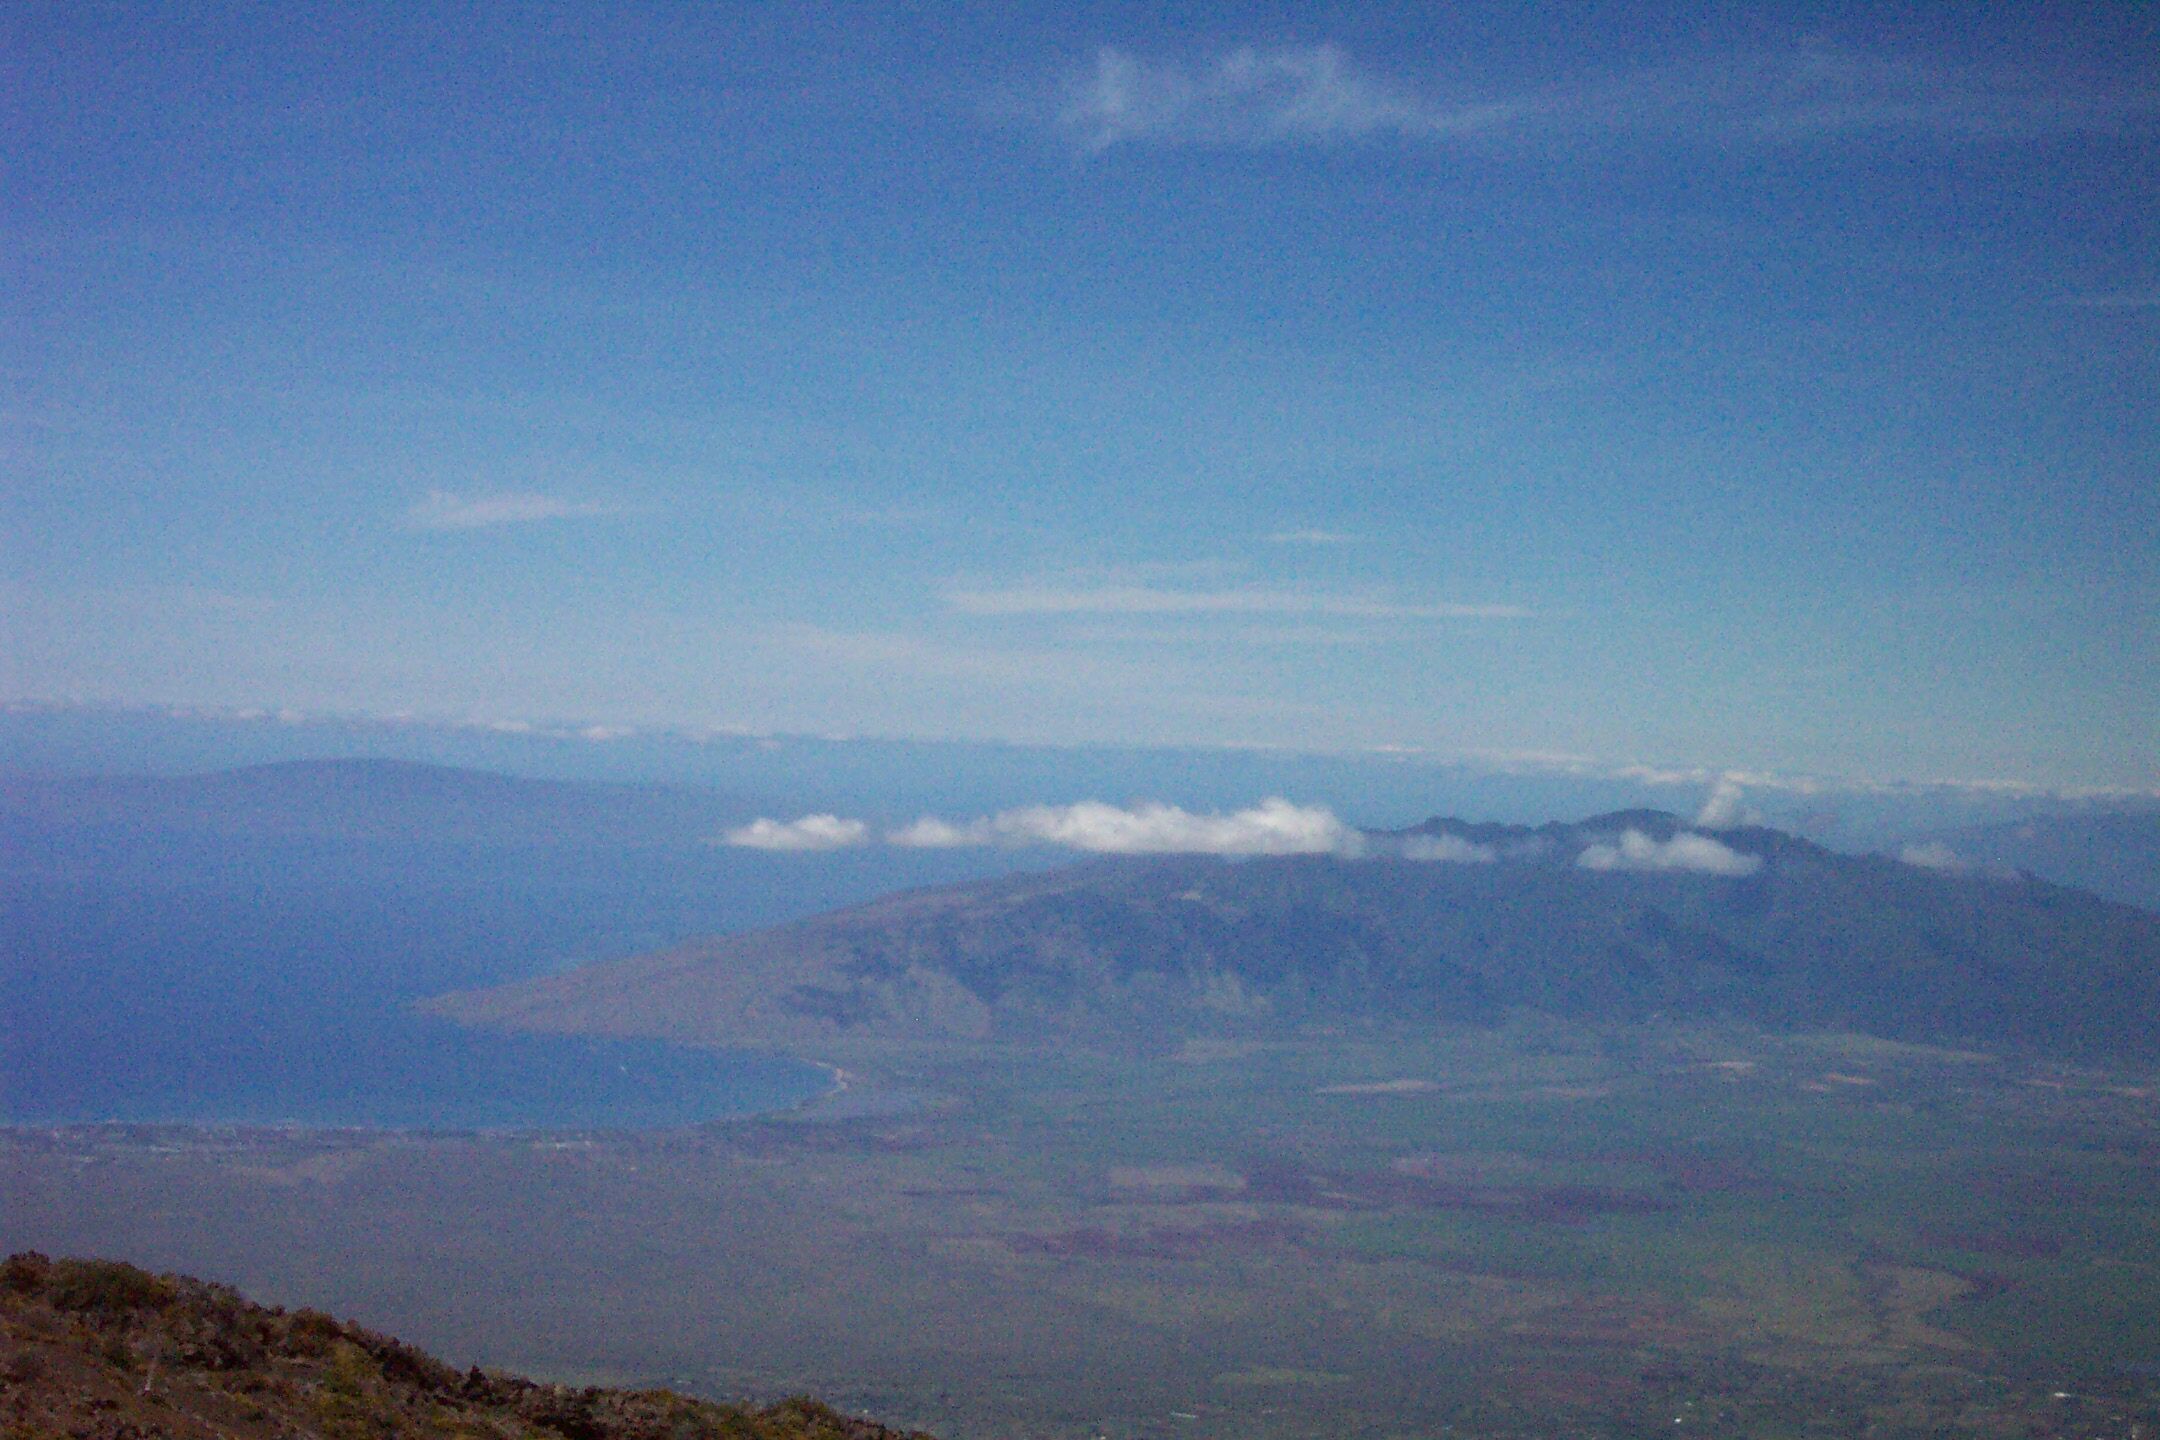 View of the west side of Maui from near the top of Mt. Haleakala.